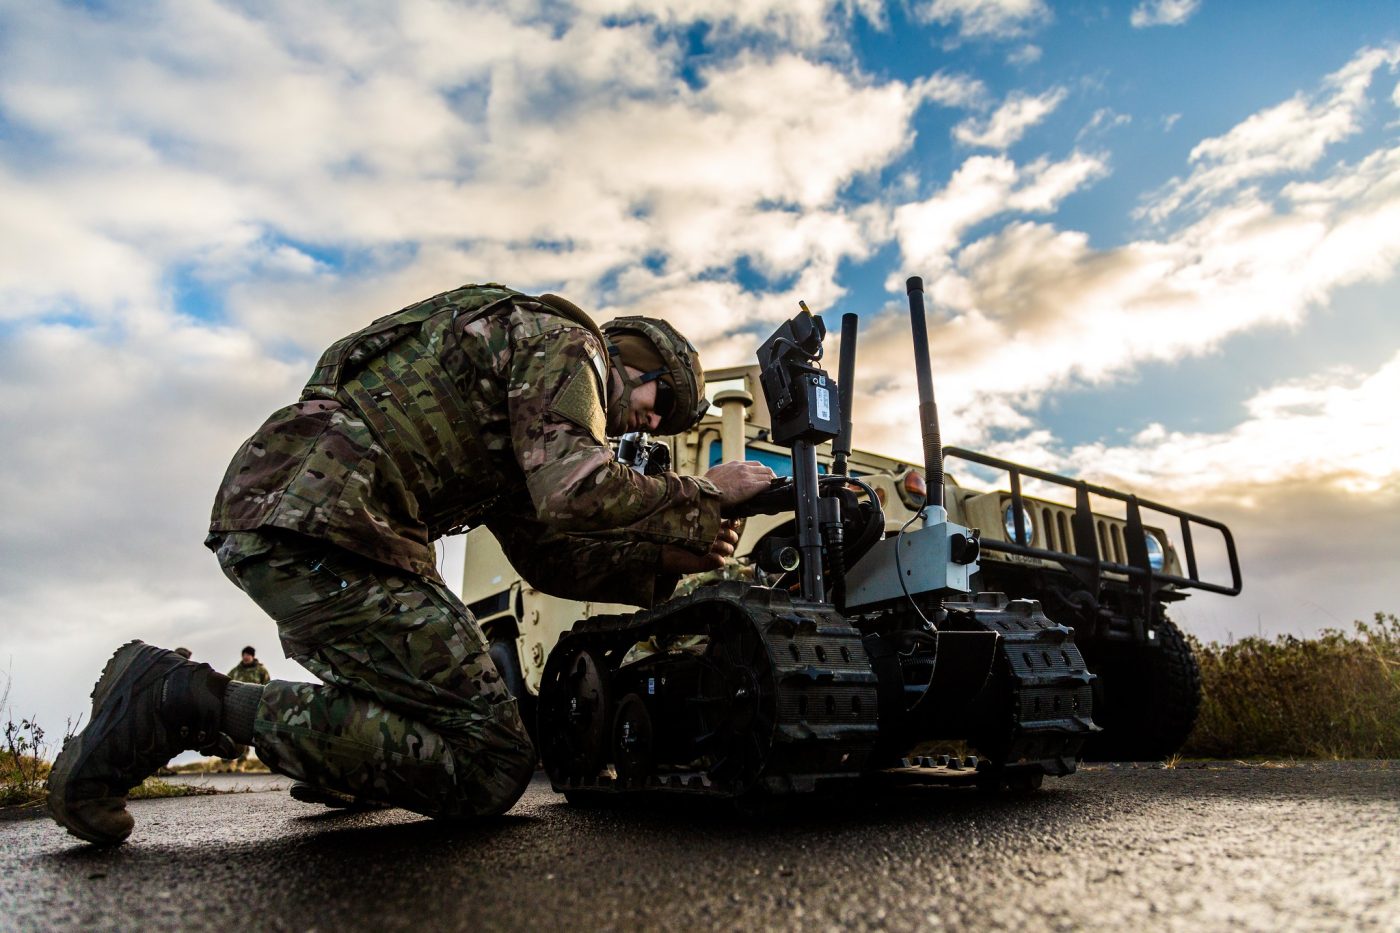 Photos: A US Air Force Explosive Ordnance Disposal (EOD) technician prepares a Mk. II Talon bomb disposal robot for work during exercise Northern Challenge. Exercise Northern Challenge 18, which involved more than 300 troops from 16 NATO Allies, was hosted by Iceland at Keflavik Air Base in September 2018. By training together, the soldiers were able to learn the latest and best tactics and techniques for dealing with Improvised Explosive Devices (IEDs), one of the least predictable weapons in modern warfare. Credit: NATO